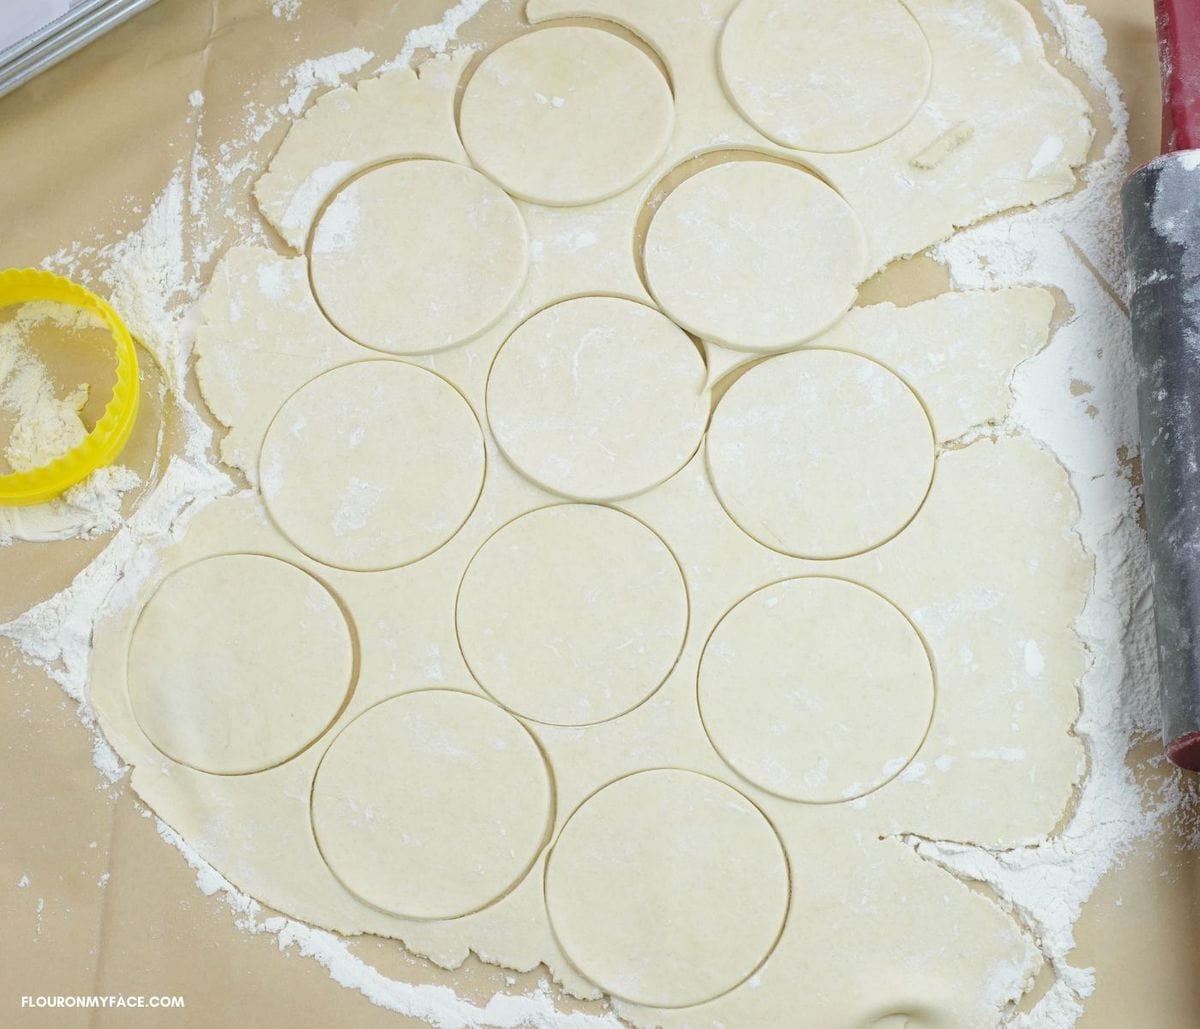 Pastry dough rolled out and cut into 4 inch circles.